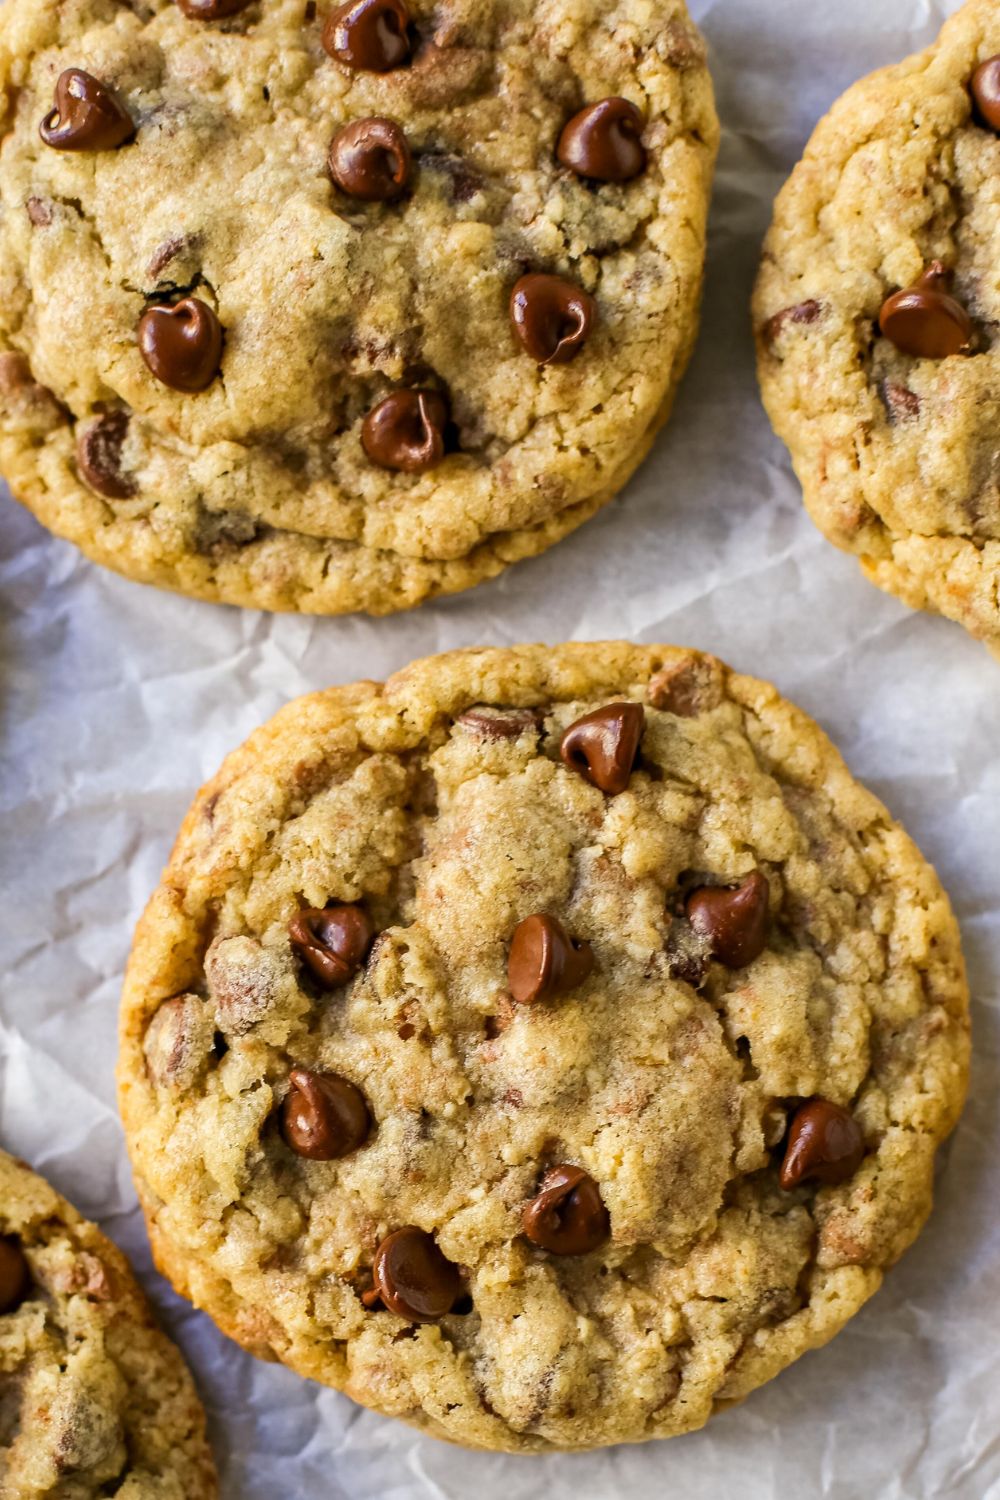 This Chocolate Chip Oatmeal Cookie Recipe was made famous from the Milk&Cookies Bakery in New York City. It has soft and chewy centers, with crisp edges, and ground oats for the perfect texture.